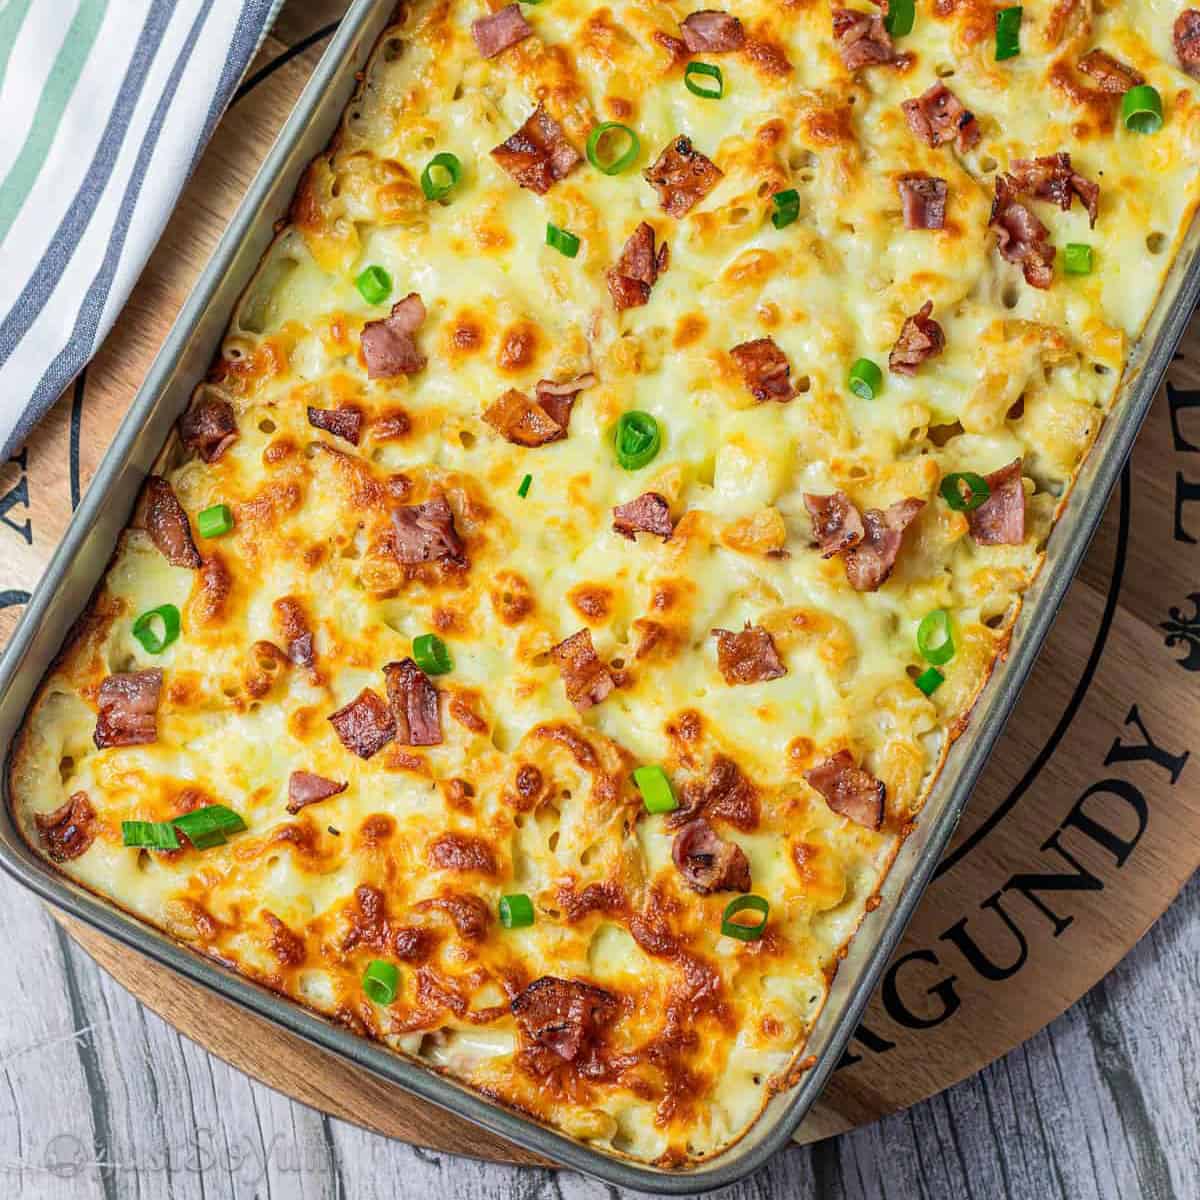 featured-image-for-macaroni-and-cheese-potato-bake-with-bacon-recipe